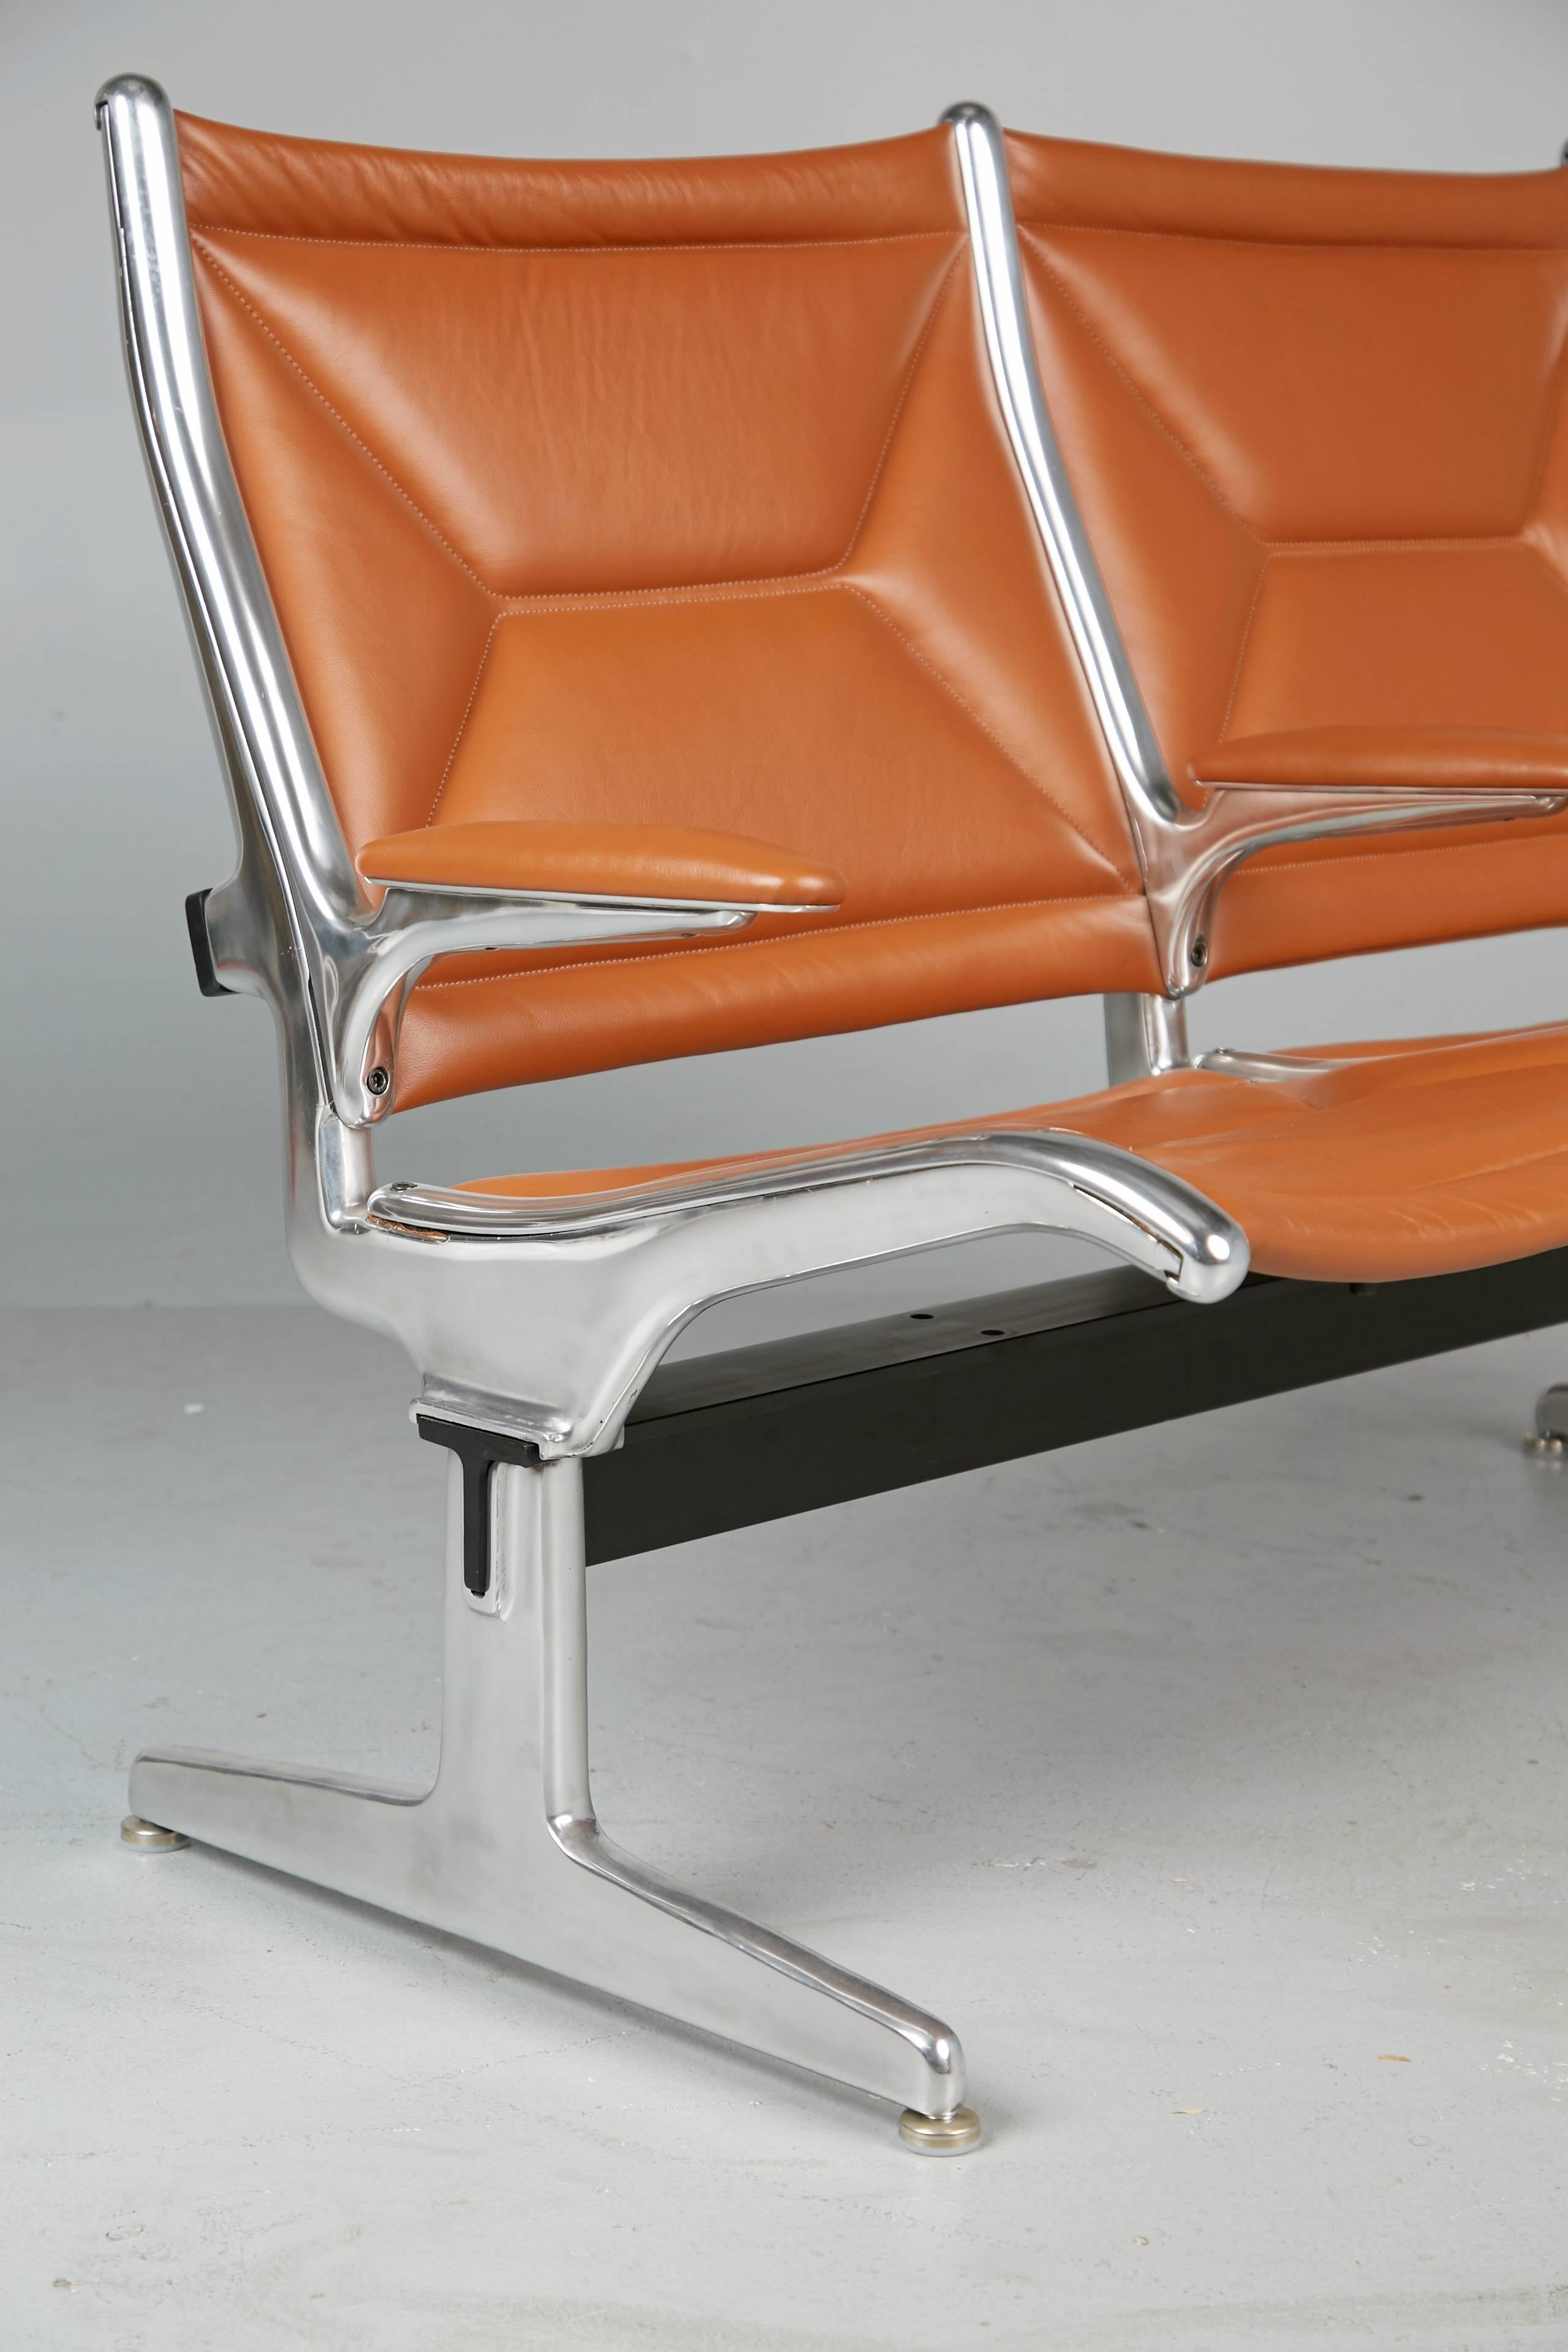 Mid-20th Century Edelman Leather Two-Seat Tandem Sling by Charles Eames for Herman Miller